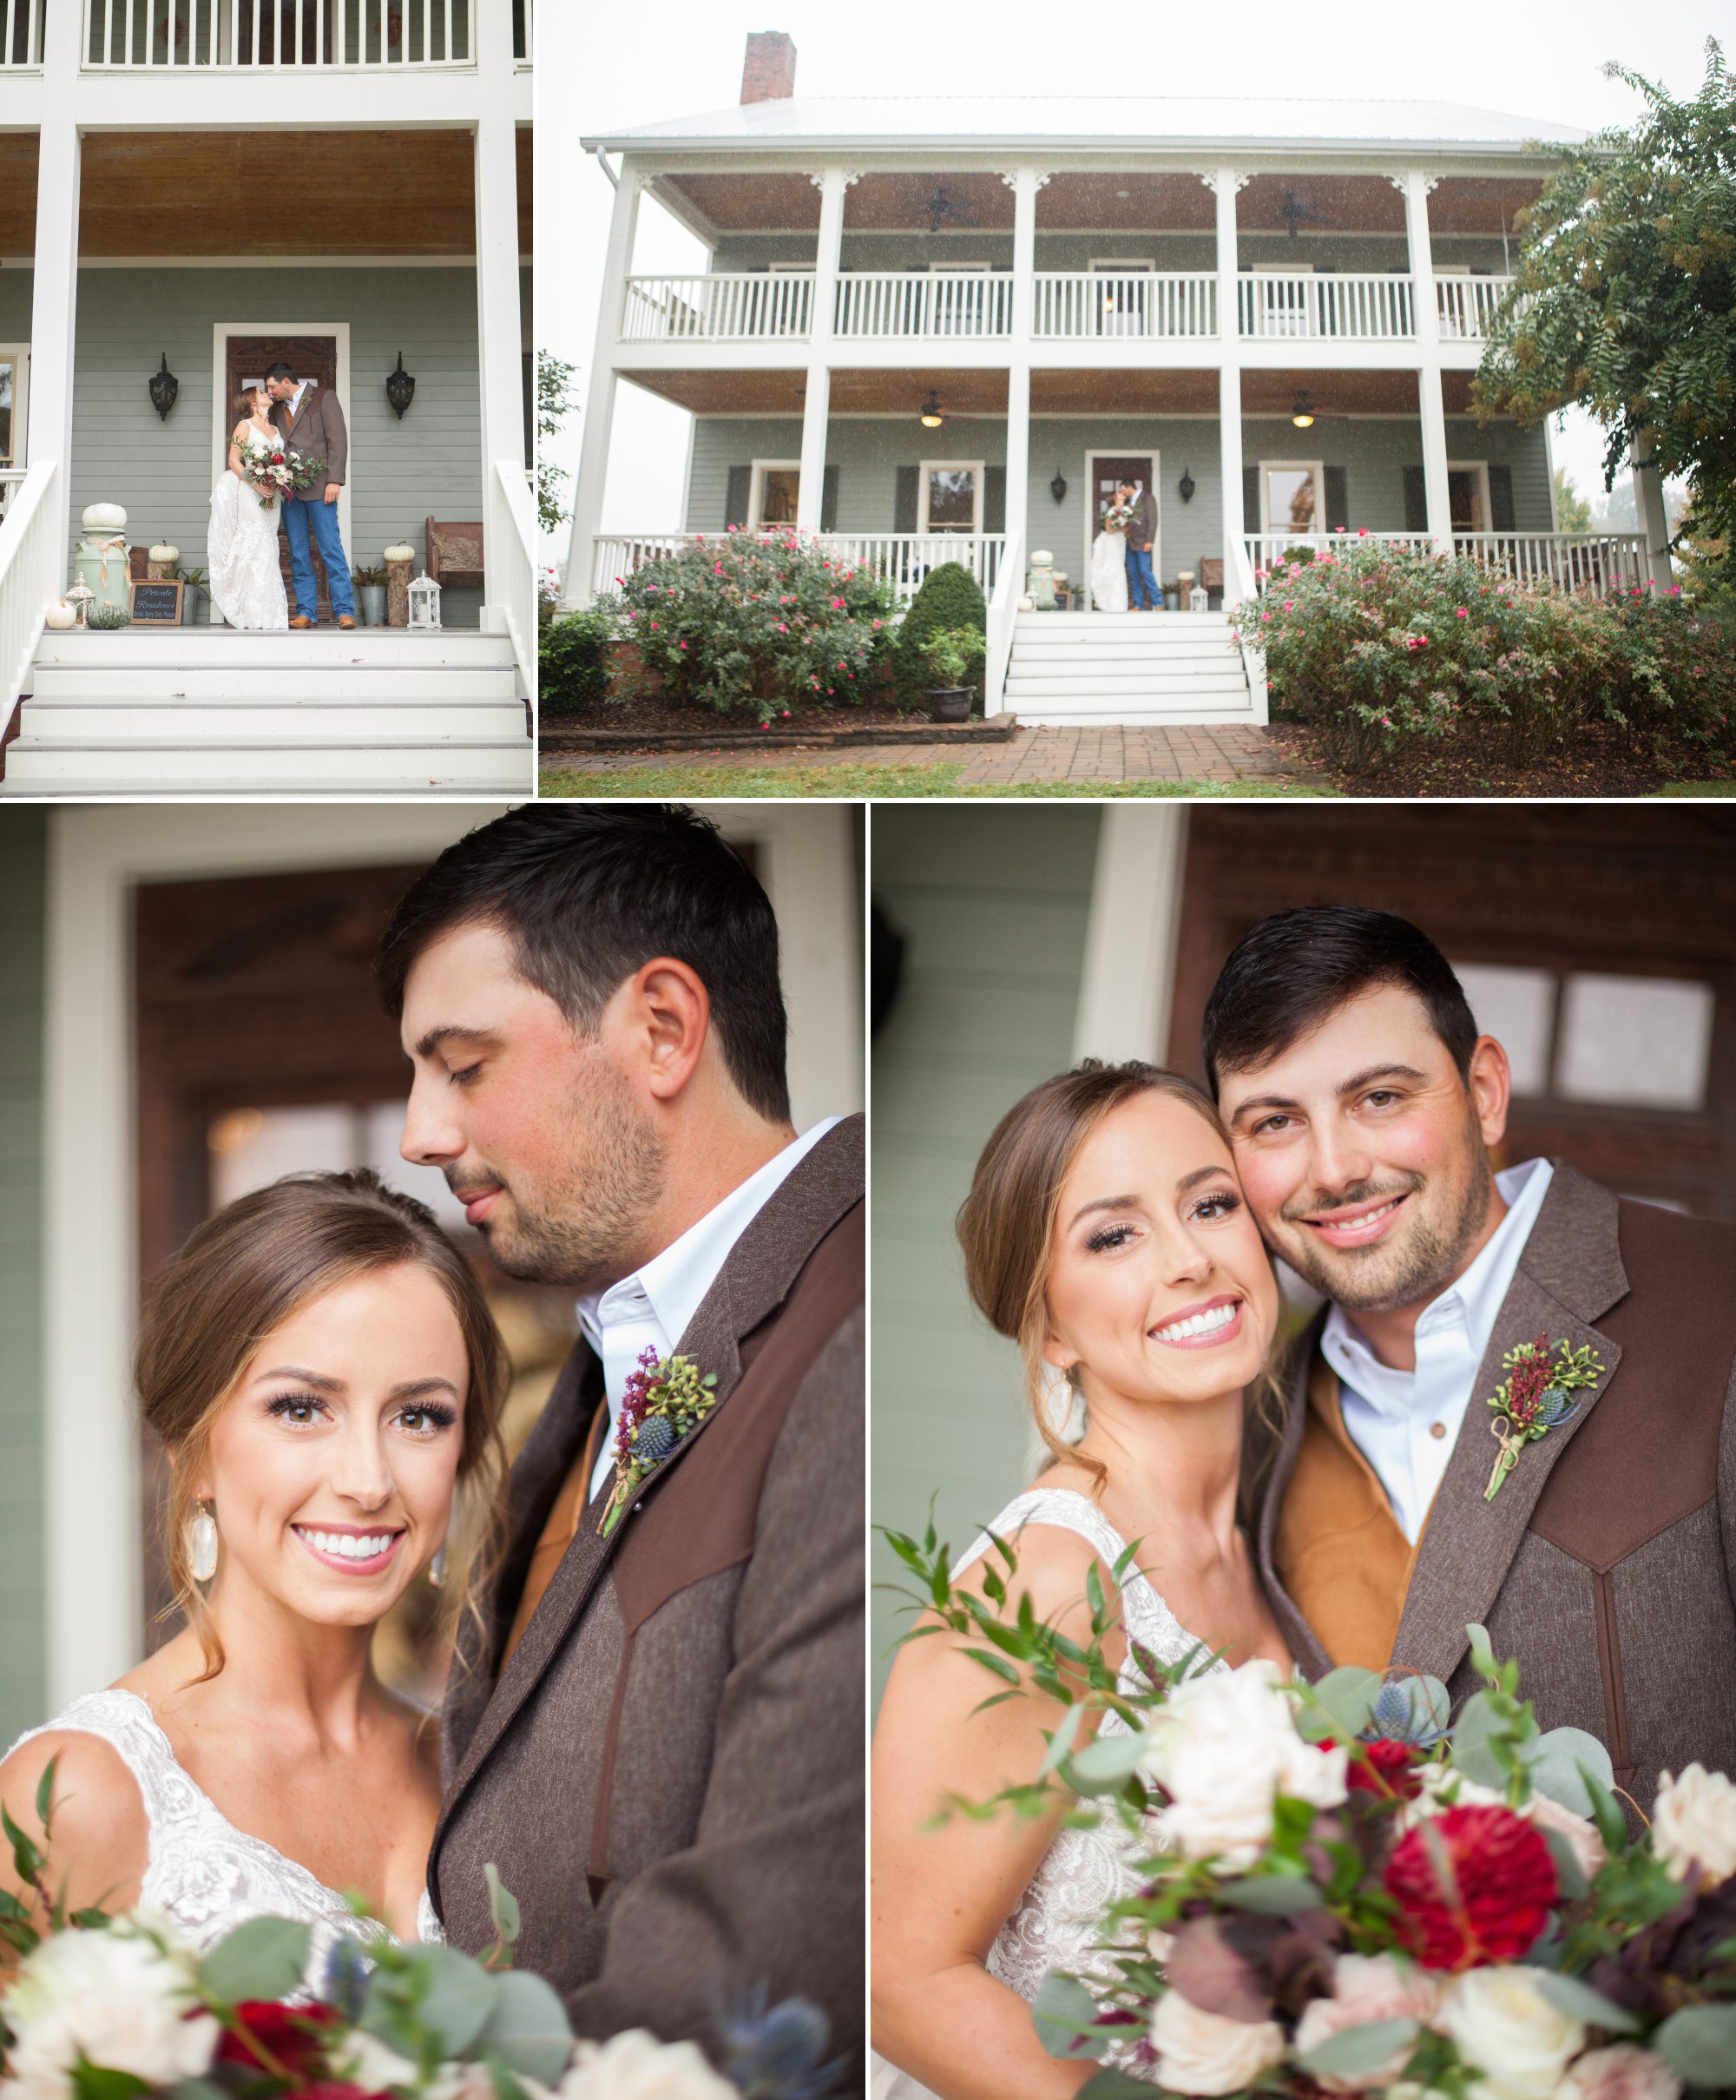 Bride and groom pose for photos on front porch before wedding reception details before wedding ceremony photography at Front Porch Farms, Wedding photography by Krista Lee